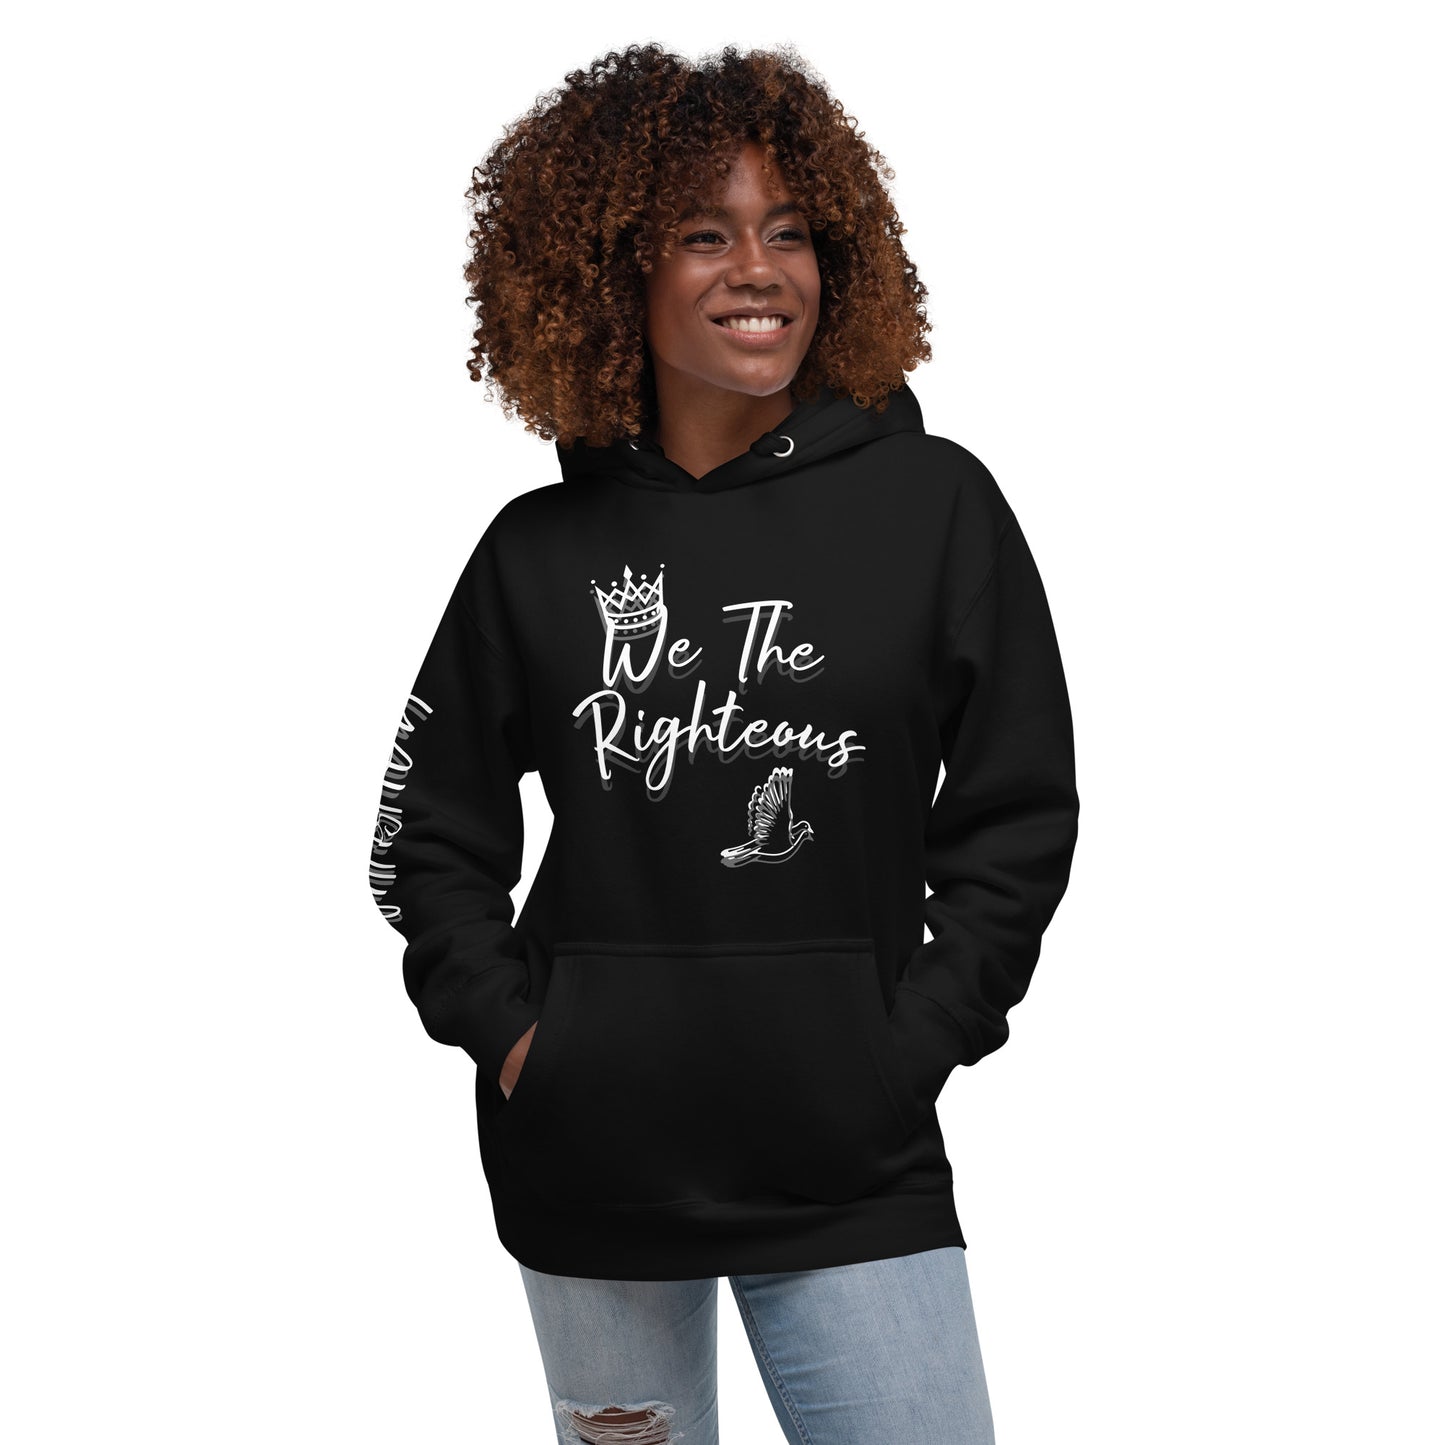 "We the Righteous" Unisex Hoodie